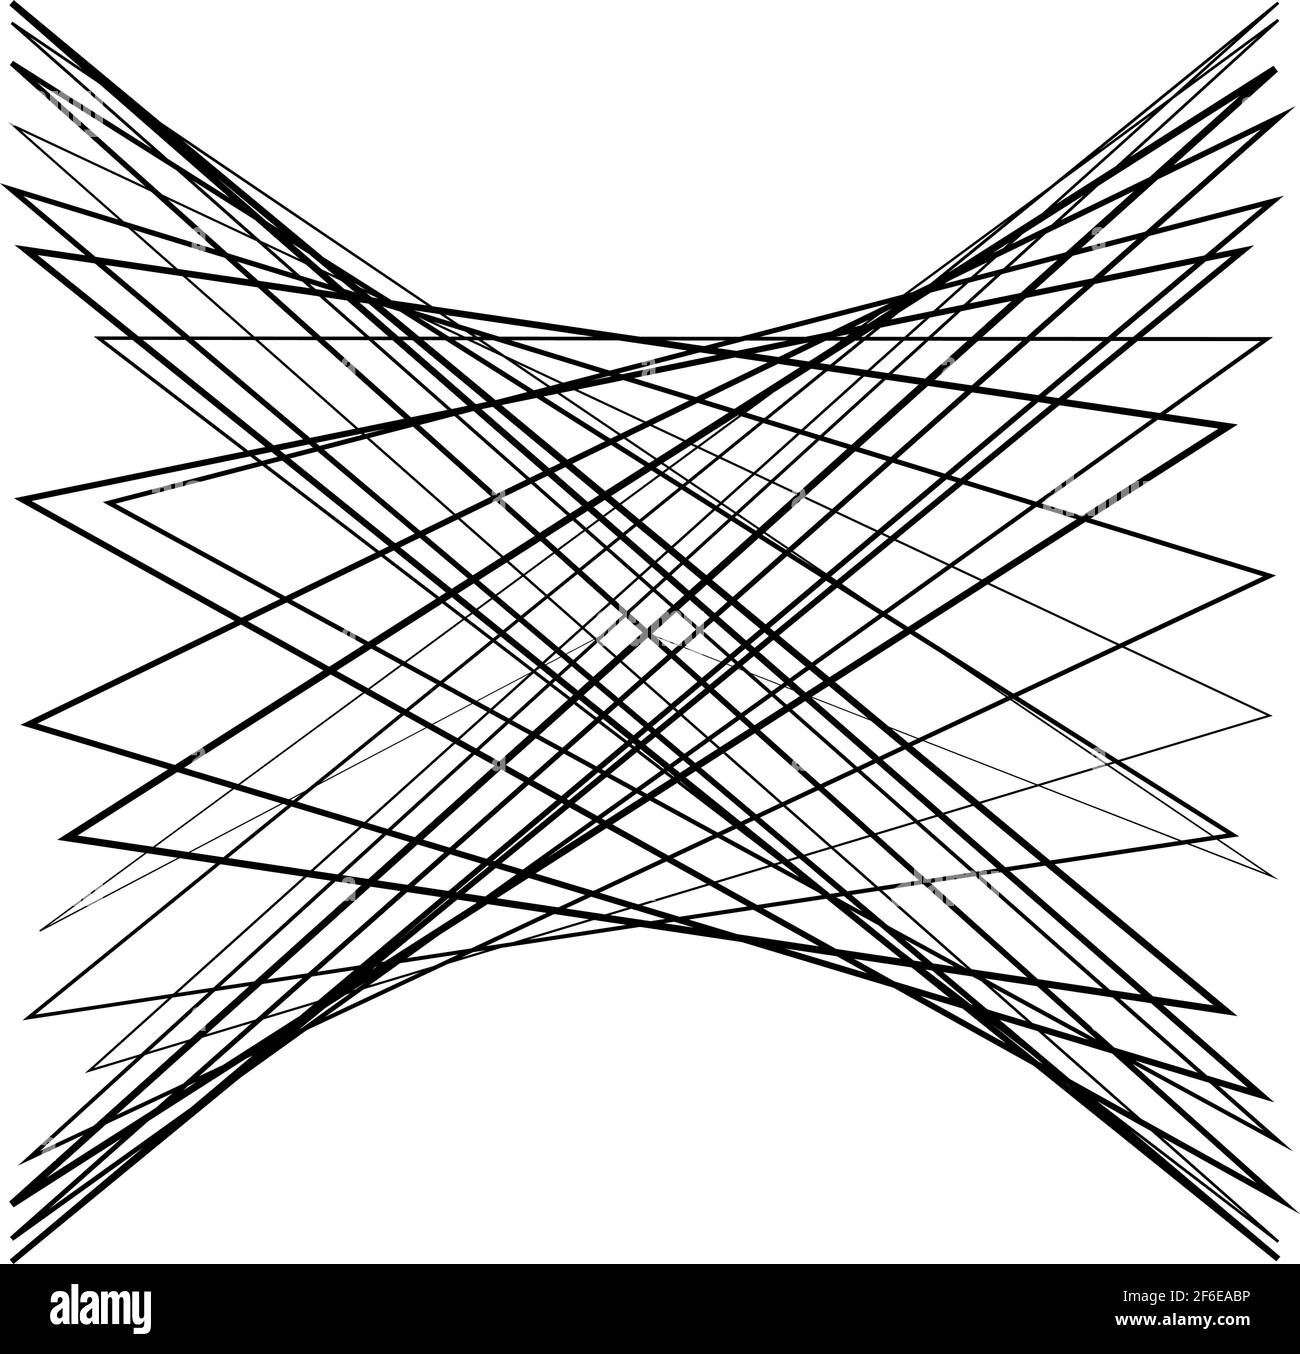 Abstract edgy, geometric line art. Angular random, chaotic lines. Spiky. tapered chaotic art. Irregular artistic element Stock Vector